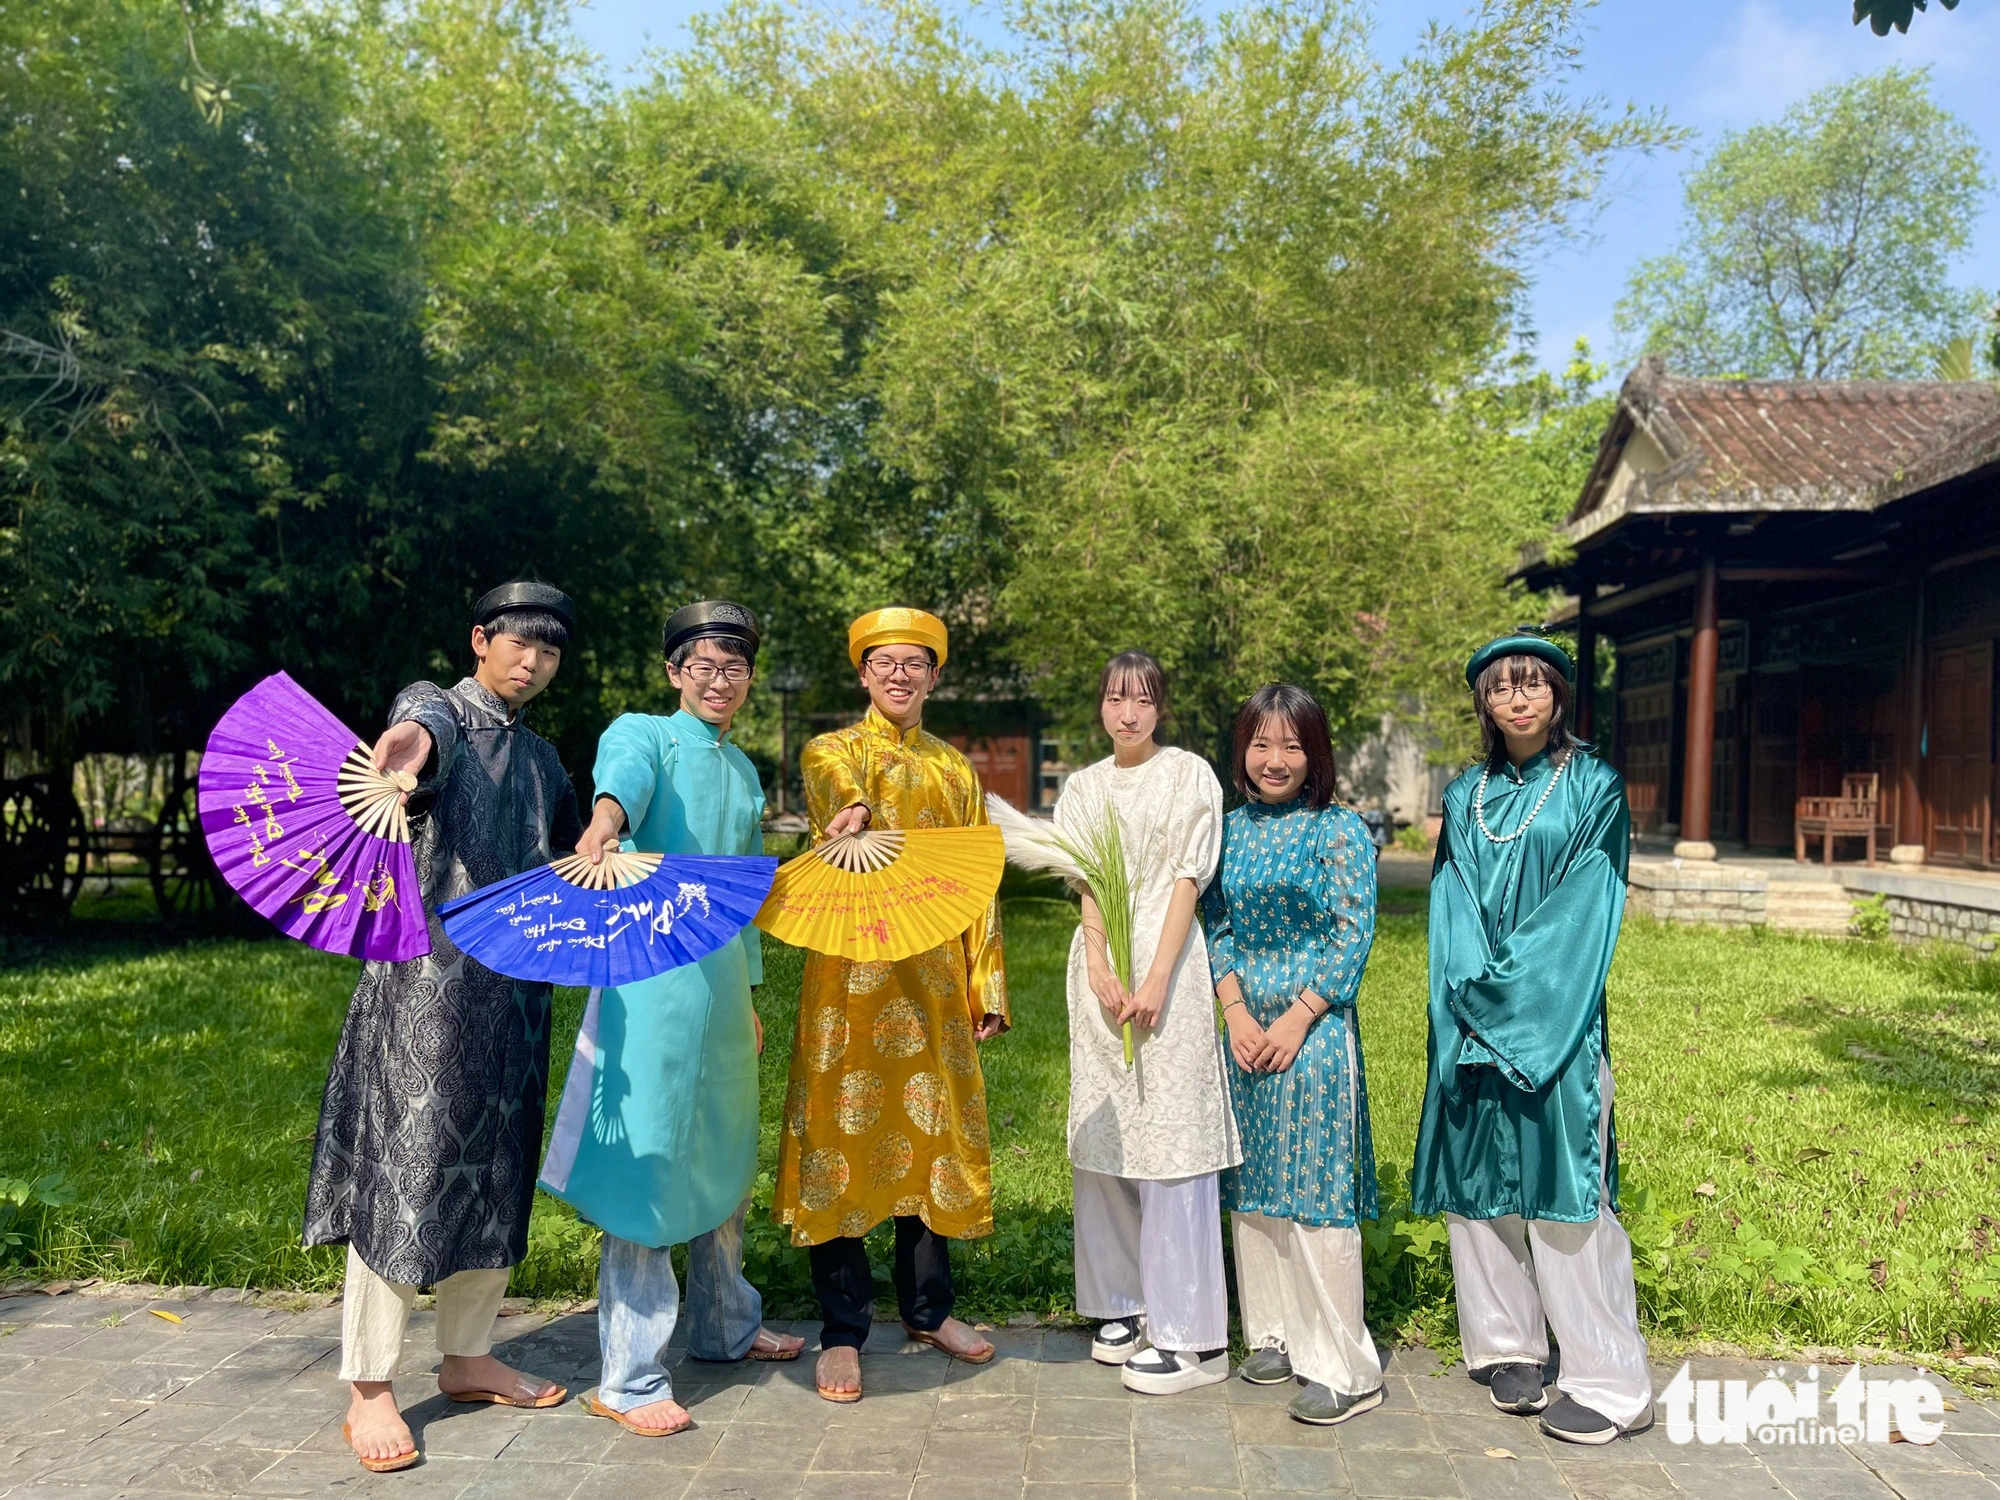 Japanese students immersed in Vietnamese cultural at Ho Chi Minh City’s Ao Dai Museum